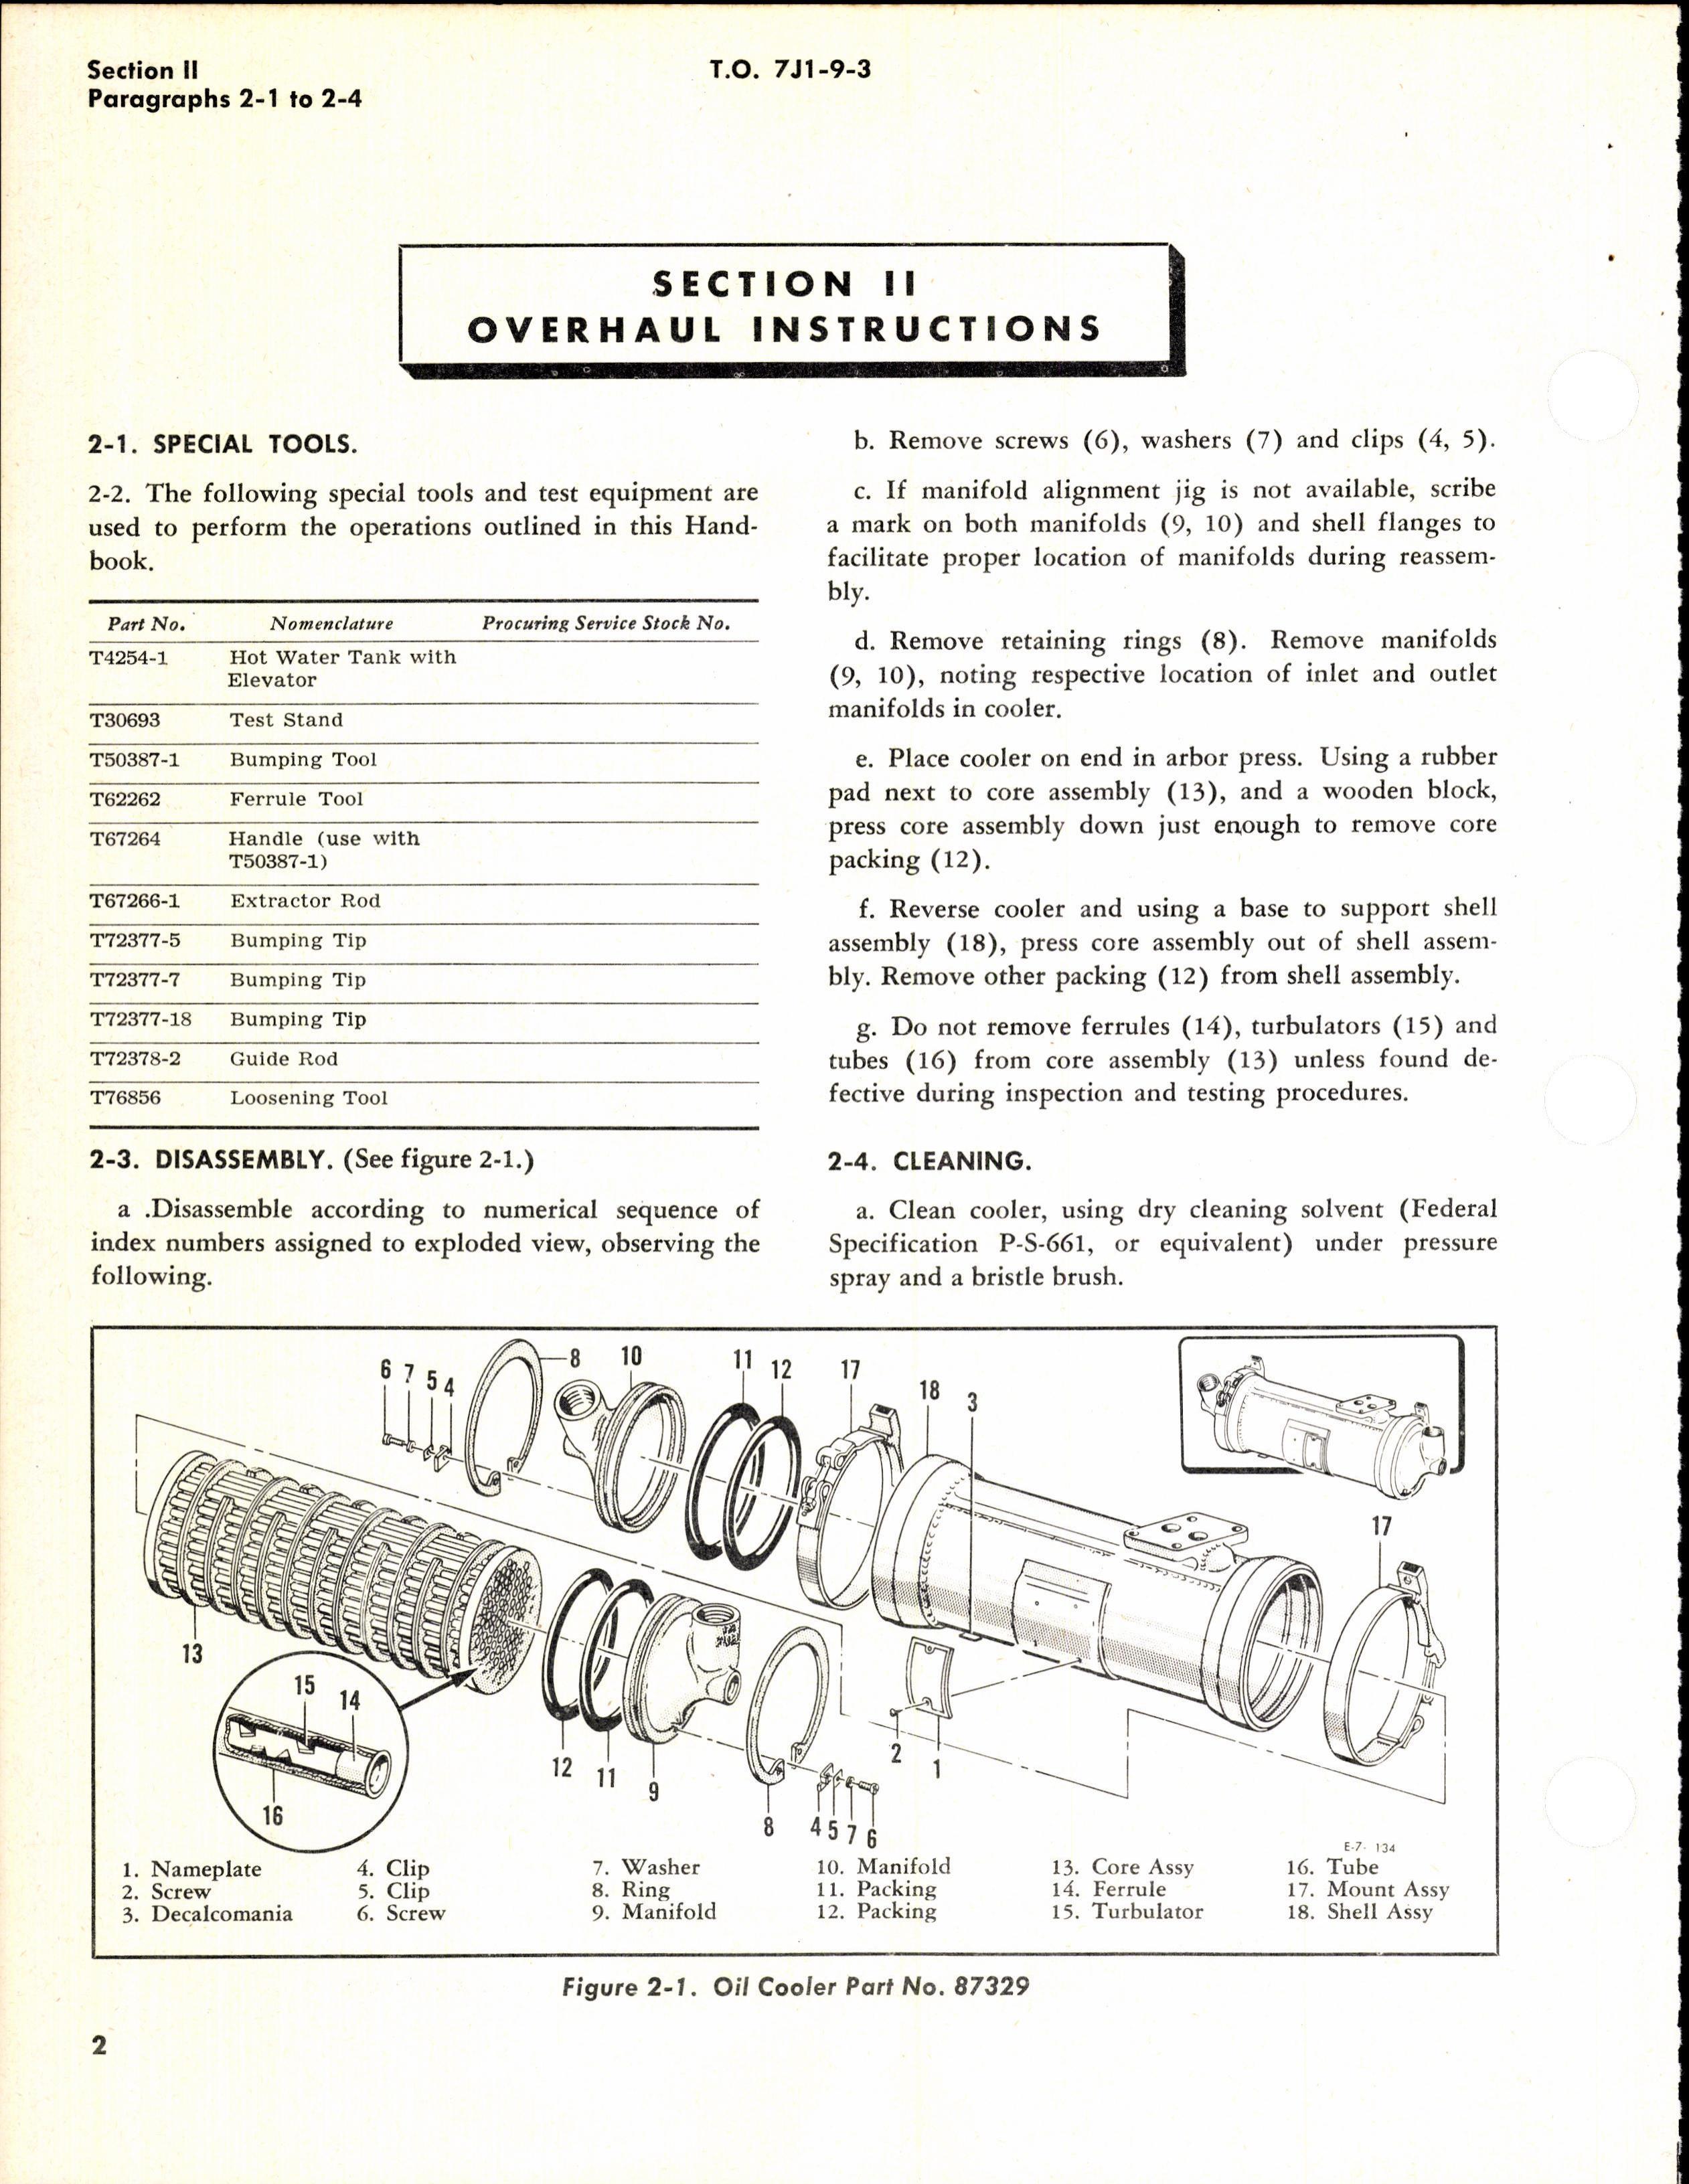 Sample page 6 from AirCorps Library document: Handbook Overhaul Instructions for Oil Coolers